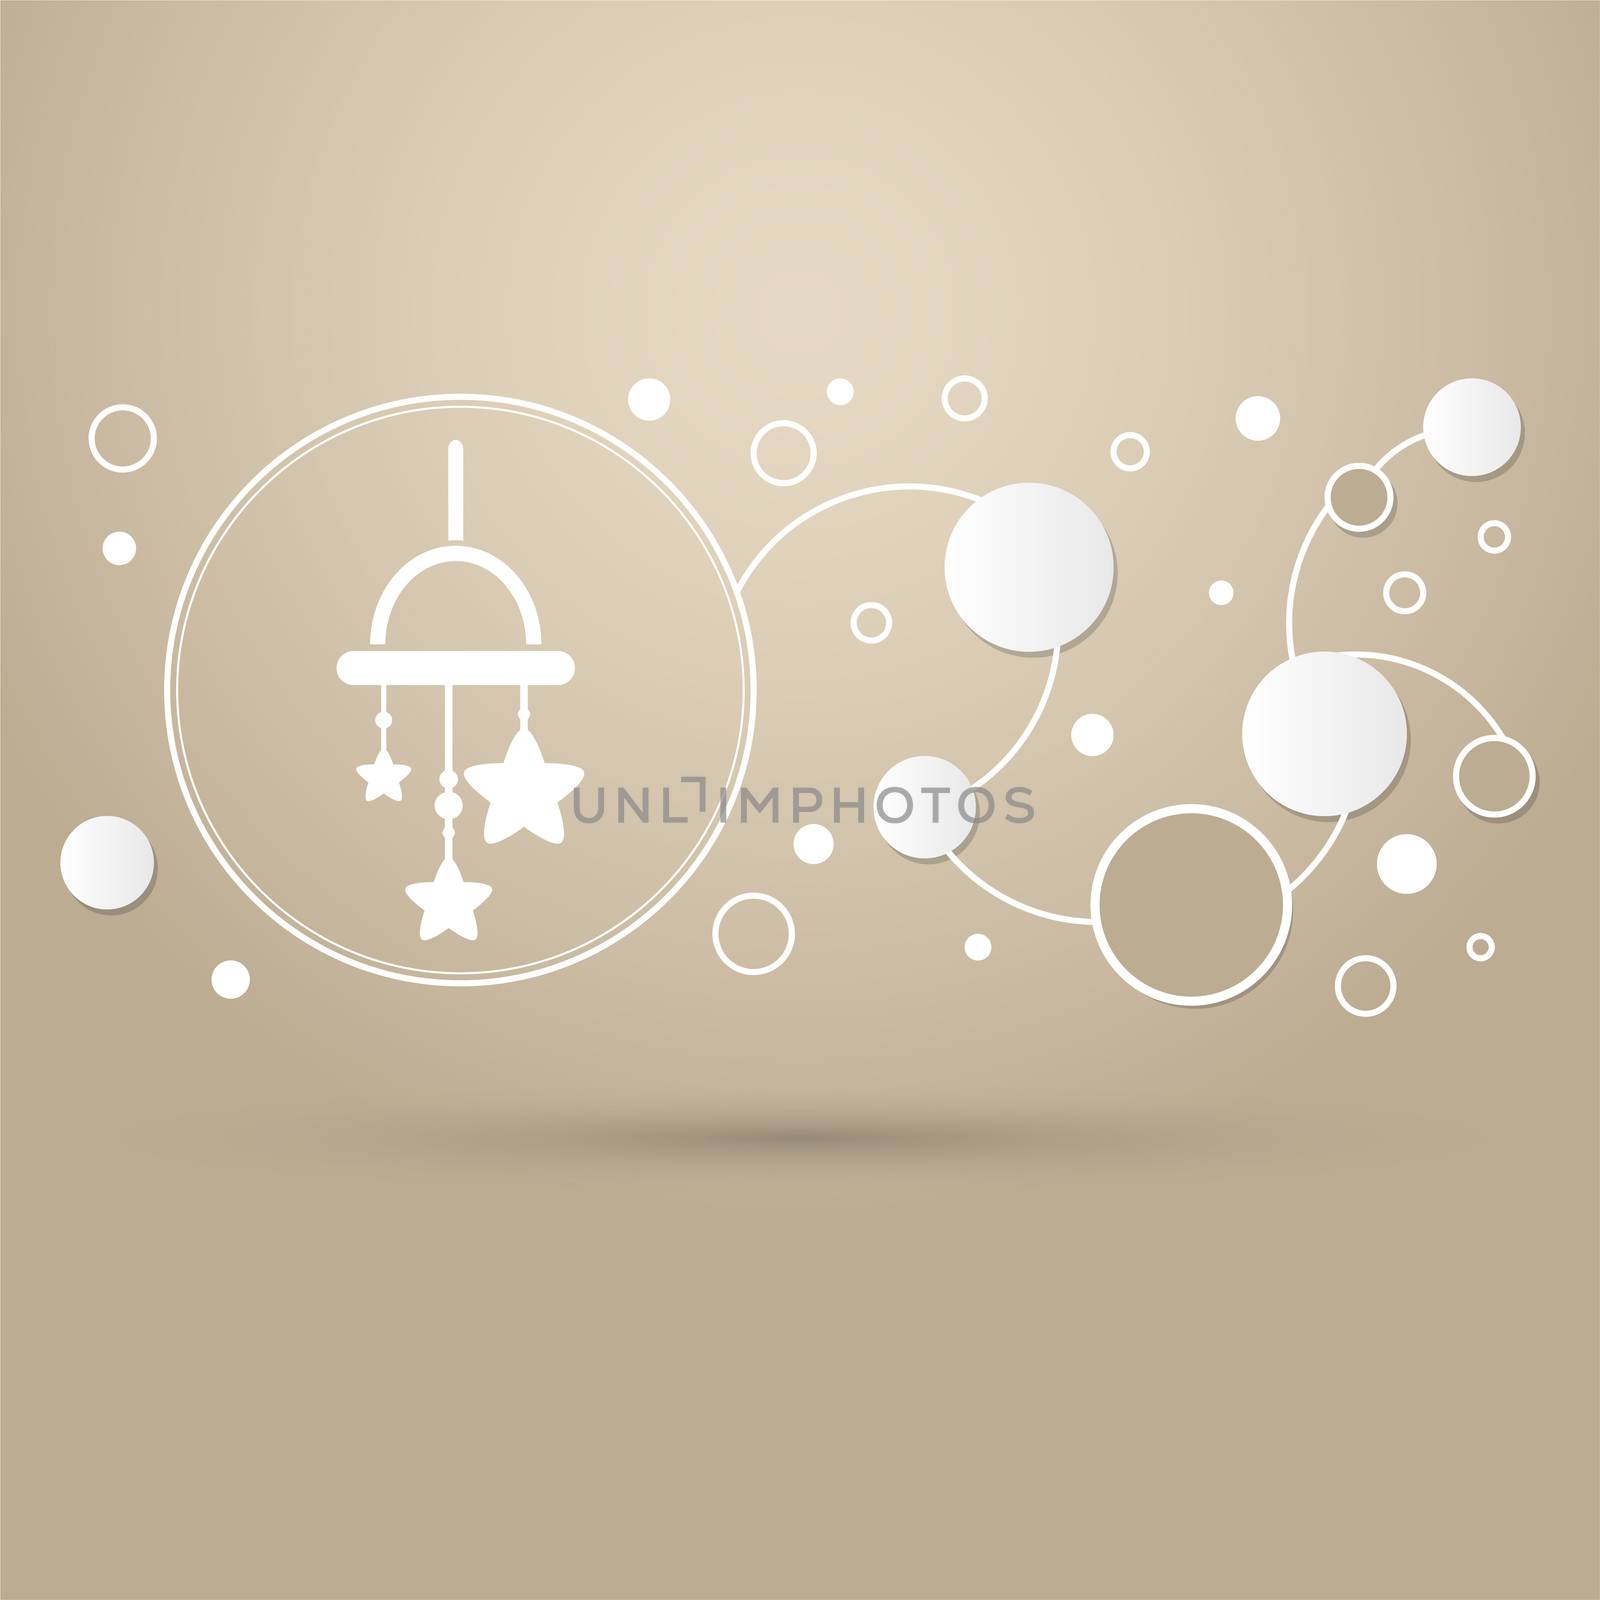 Baby crib hanging toy icon on a brown background with elegant style and modern design infographic.  by Adamchuk